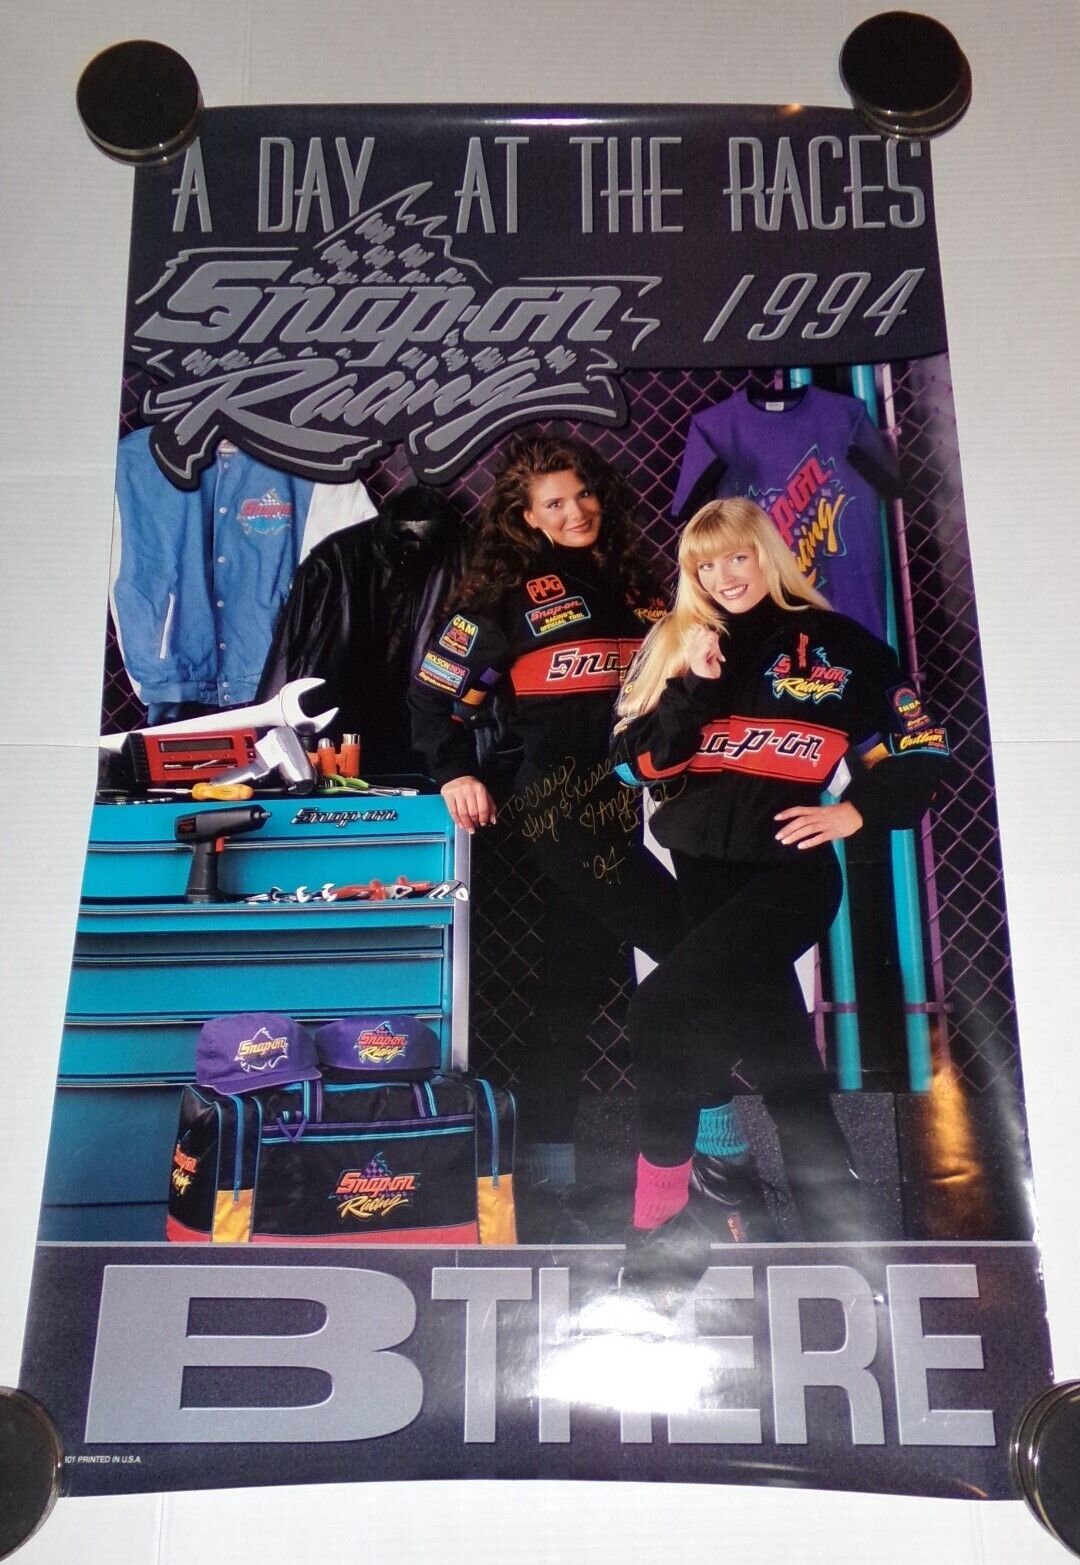 RARE 1994 SNAP-ON RACING TOOL SIGNED A DAY AT THE RACE NASCAR POSTER